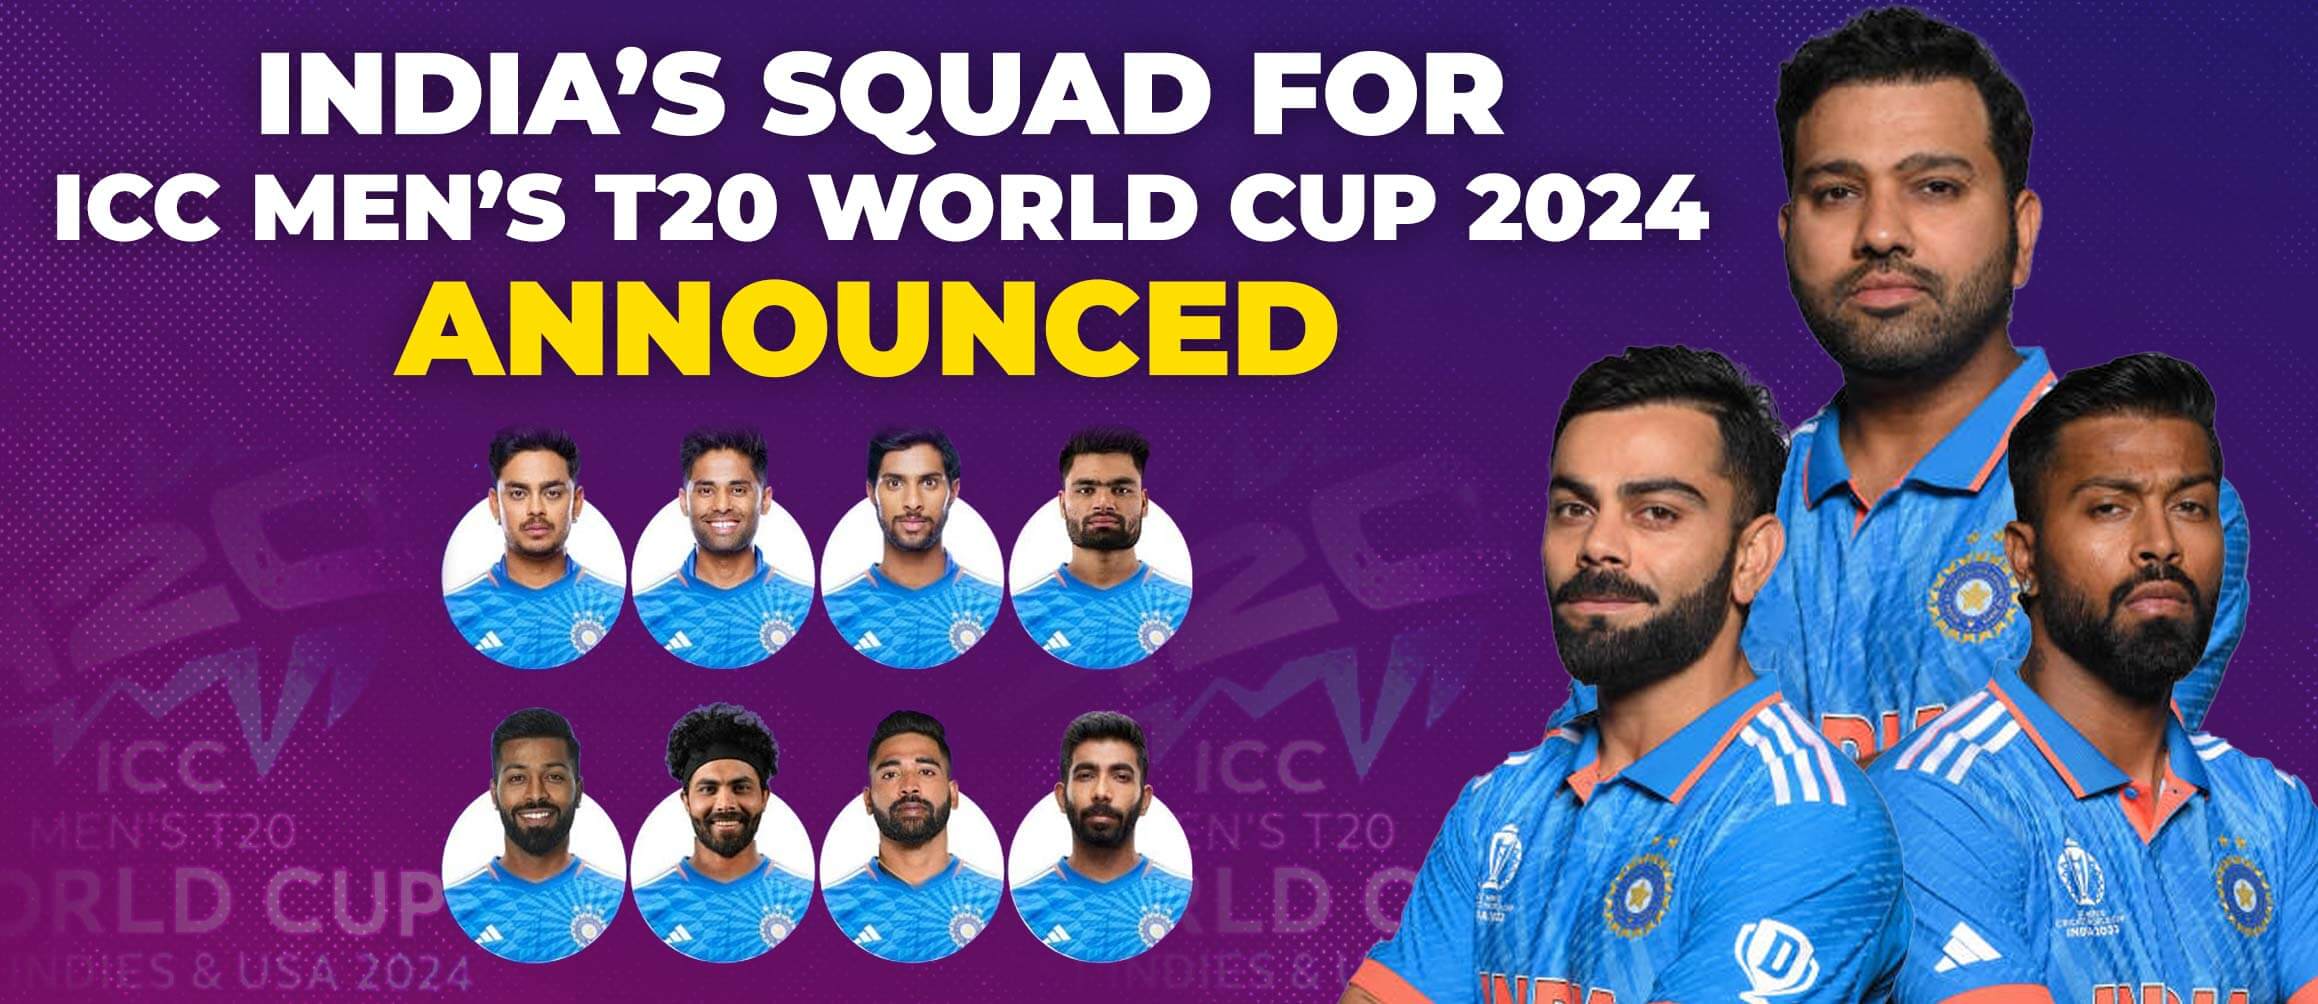 India’s Squad for ICC Men’s T20 World Cup 2024 Announced